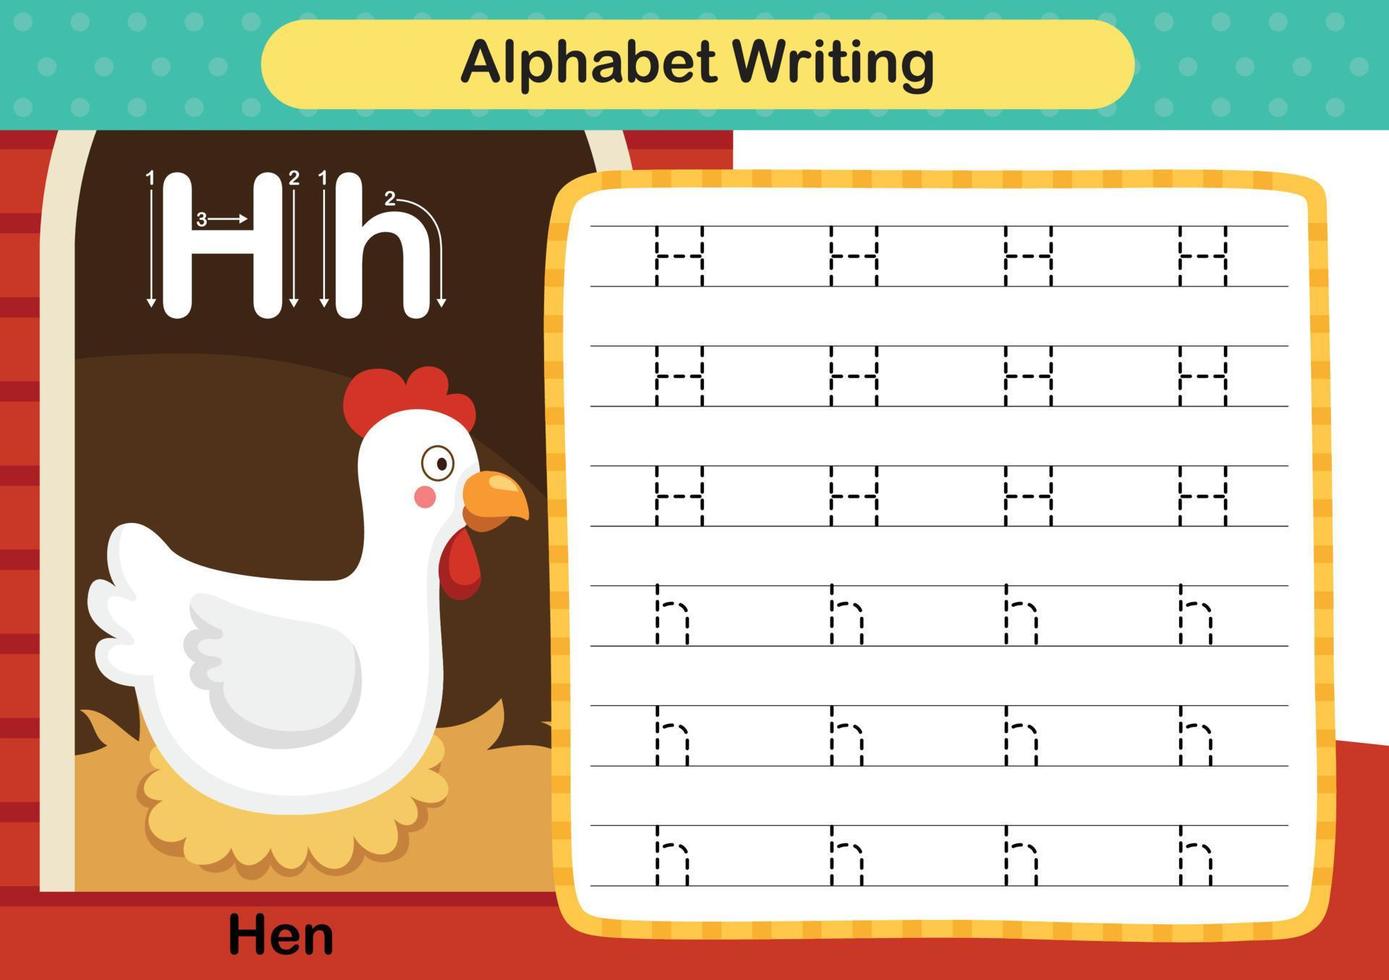 Alphabet Letter  H - Hen exercise with cartoon vocabulary illustration, vector